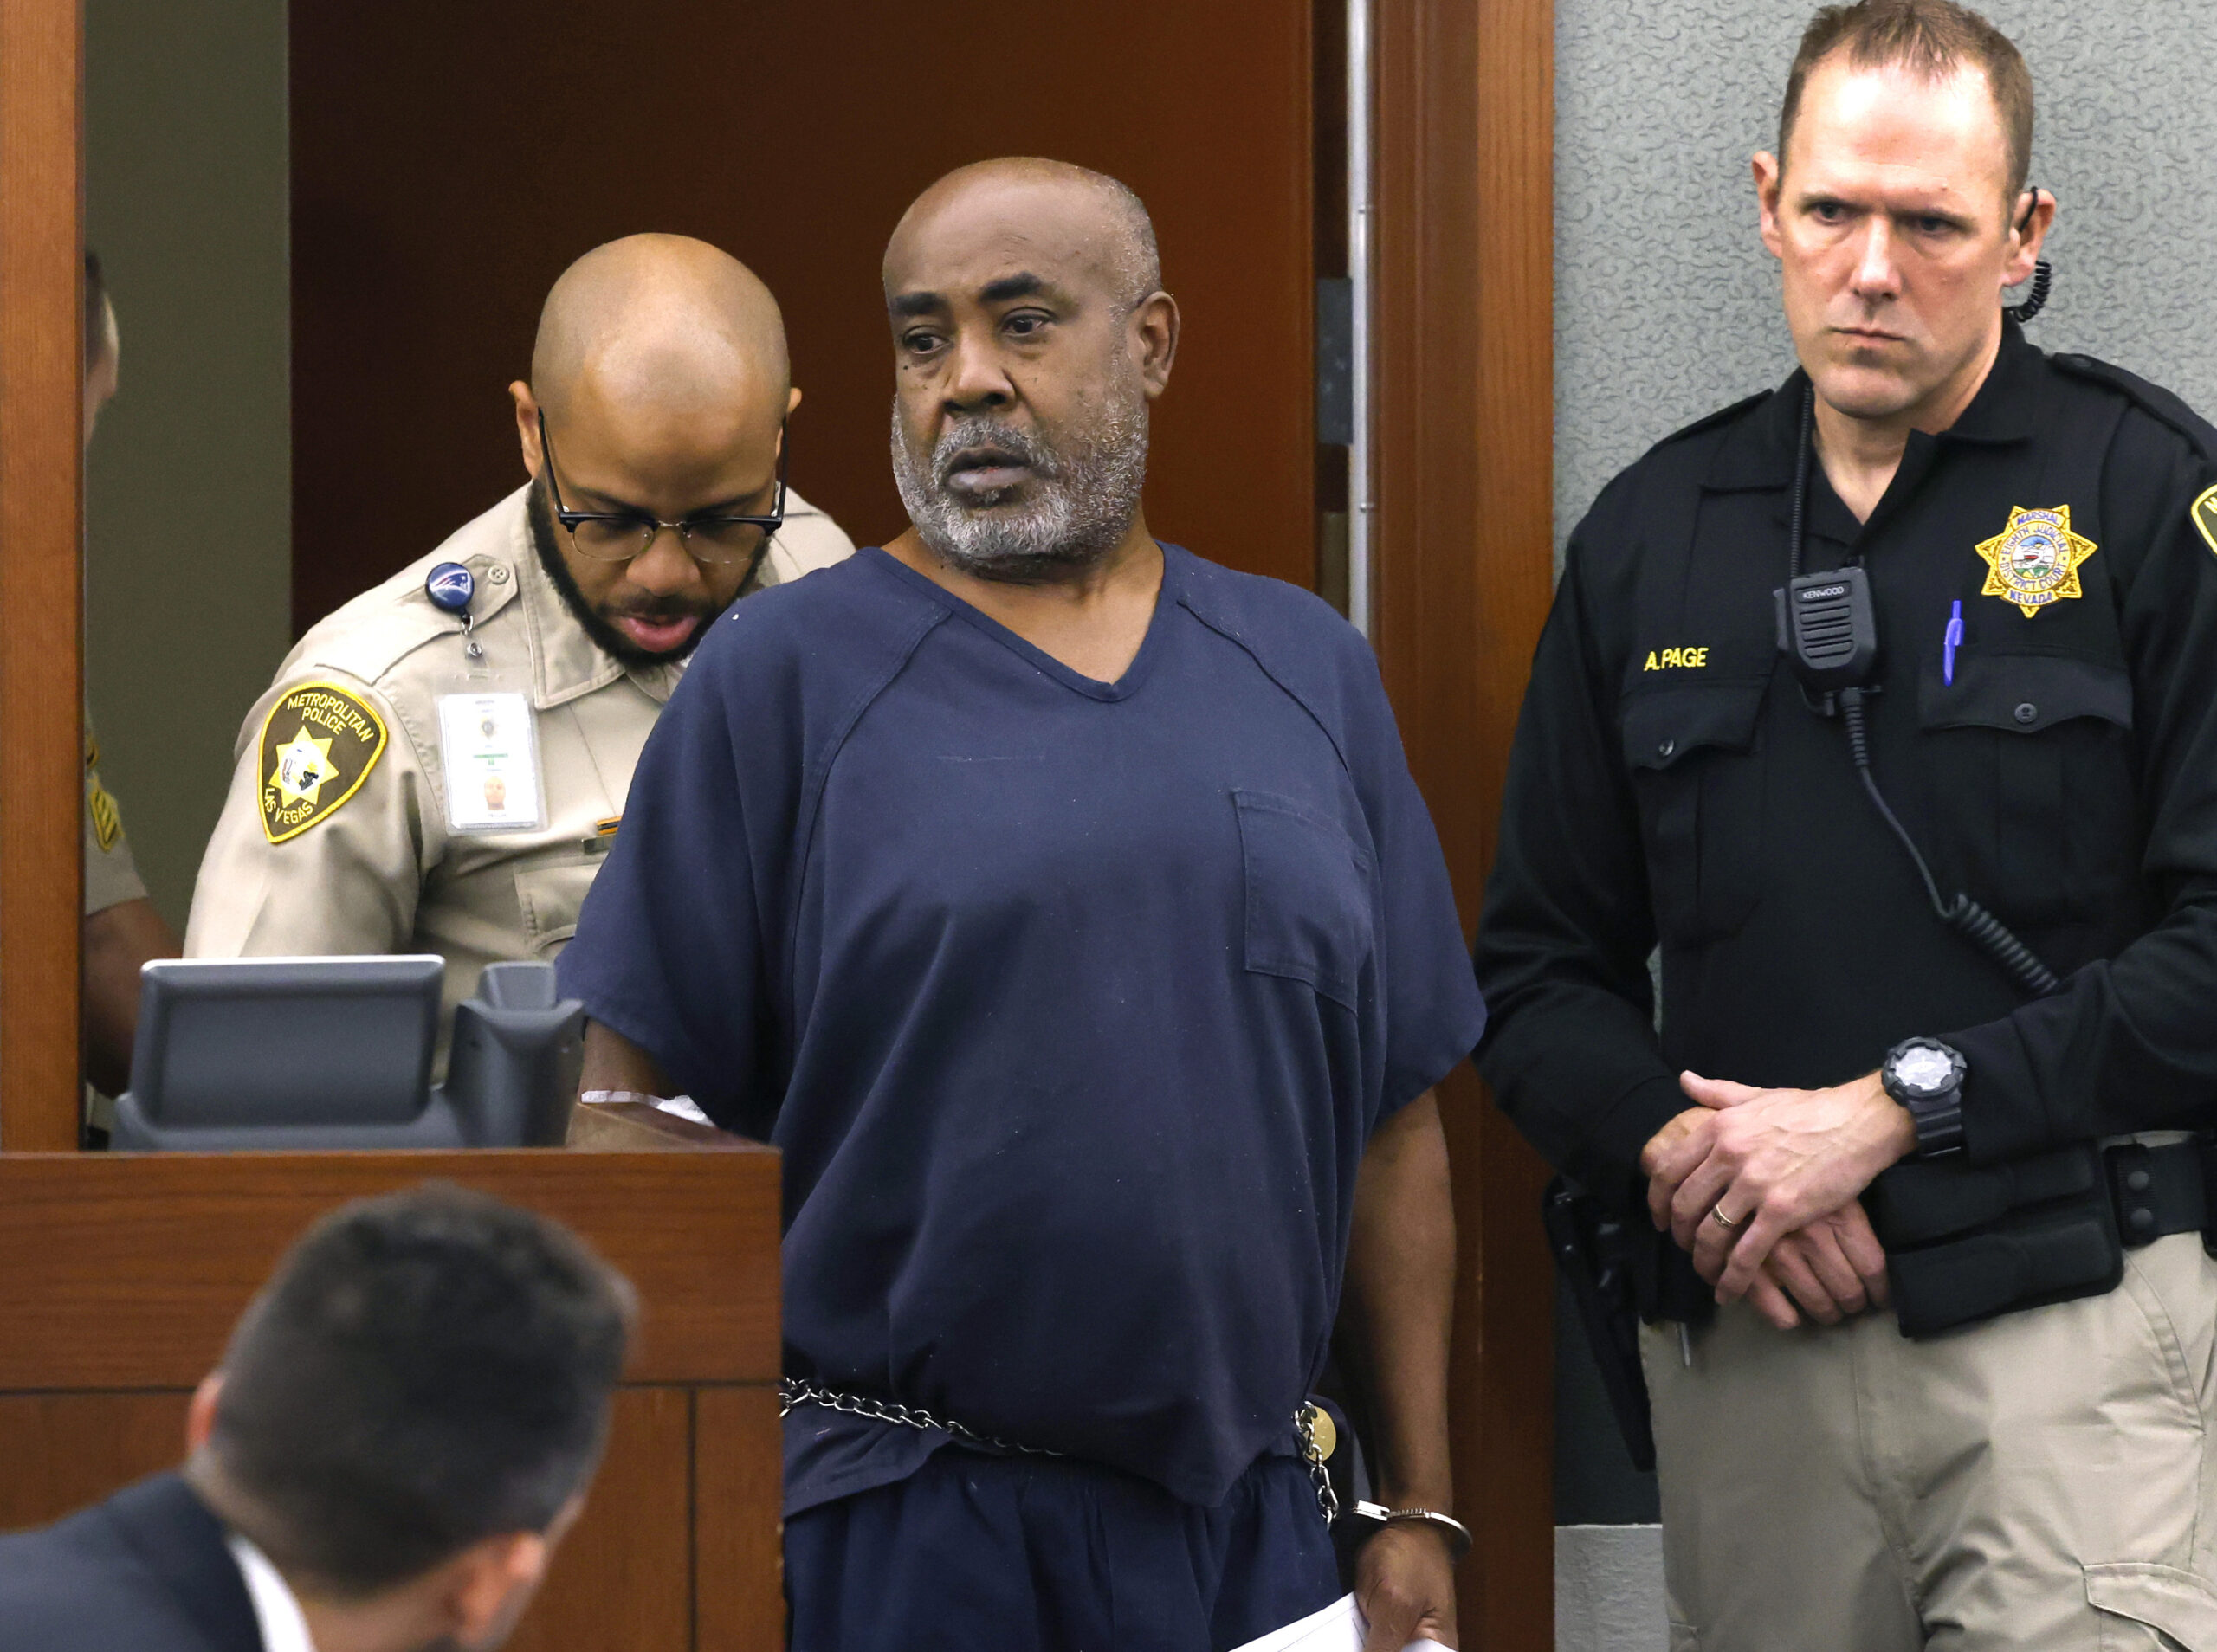 Tupac Shakur murder suspect Duane “Keffe D” Davis appears in a Las Vegas court for the first time